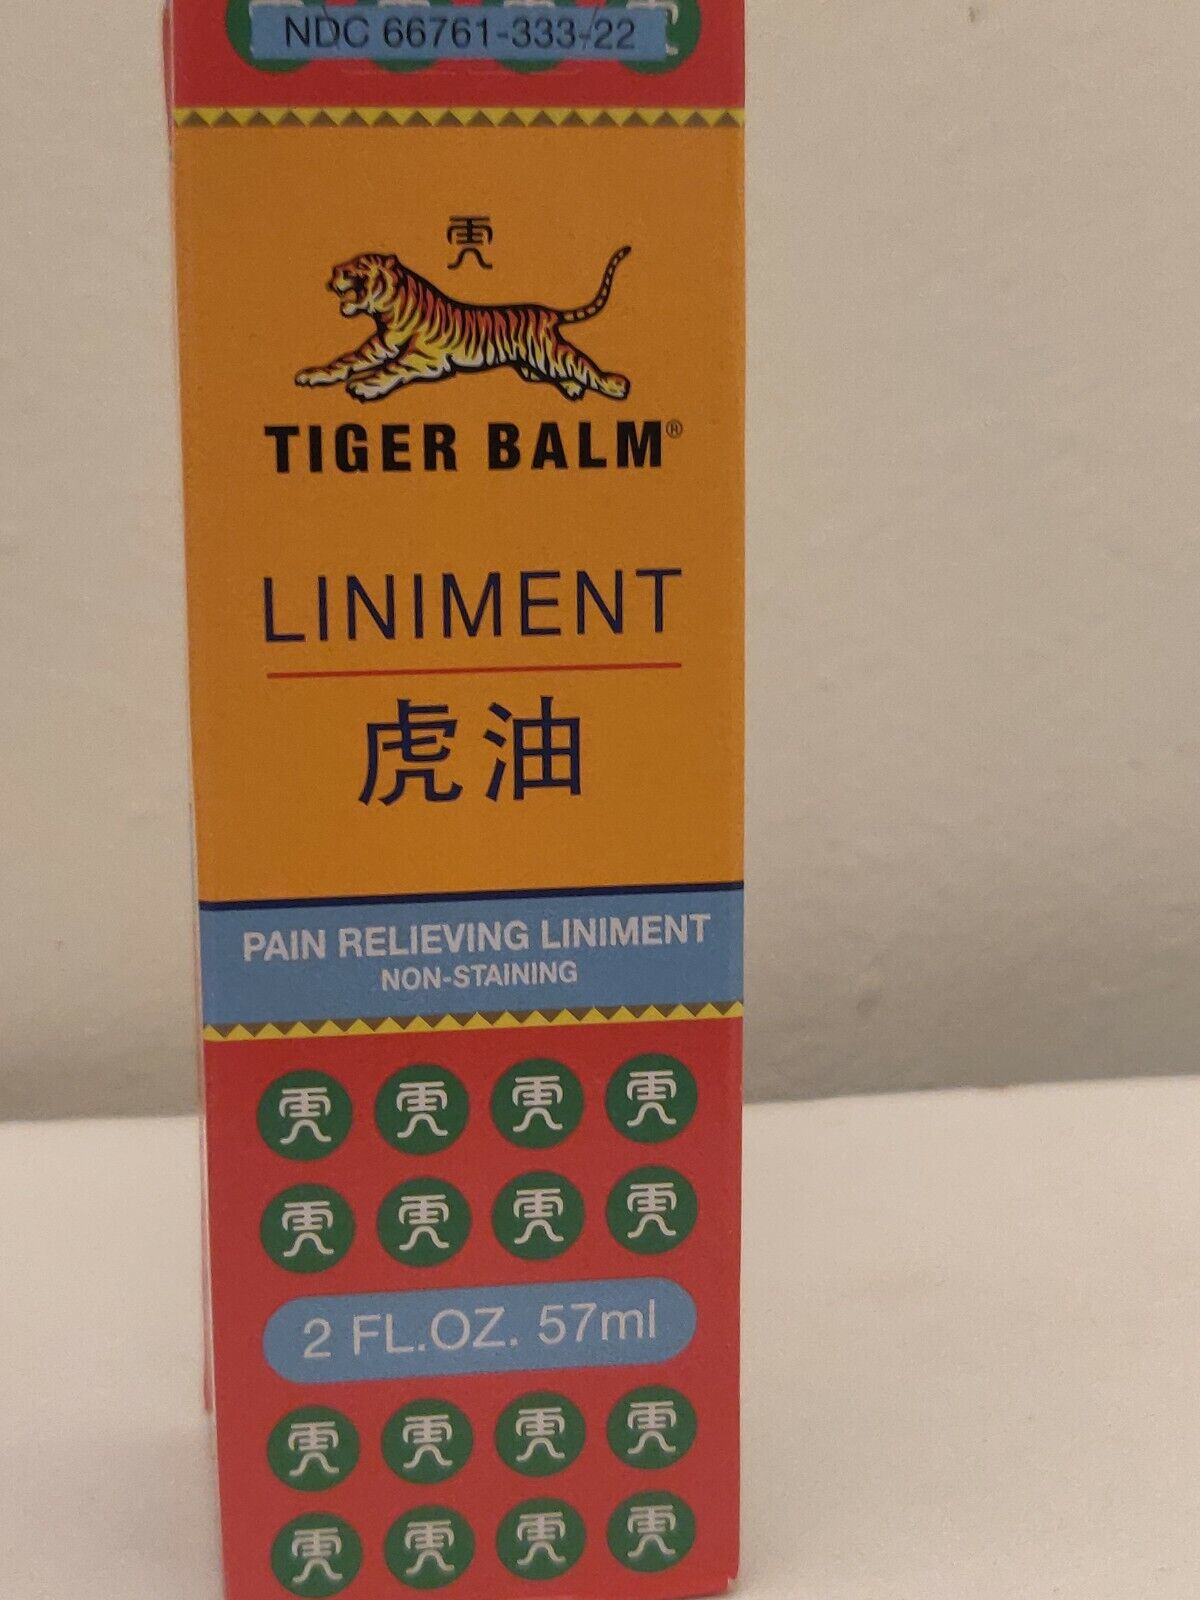 Tiger Balm Liniment Pain Relieving 2 Fl Oz